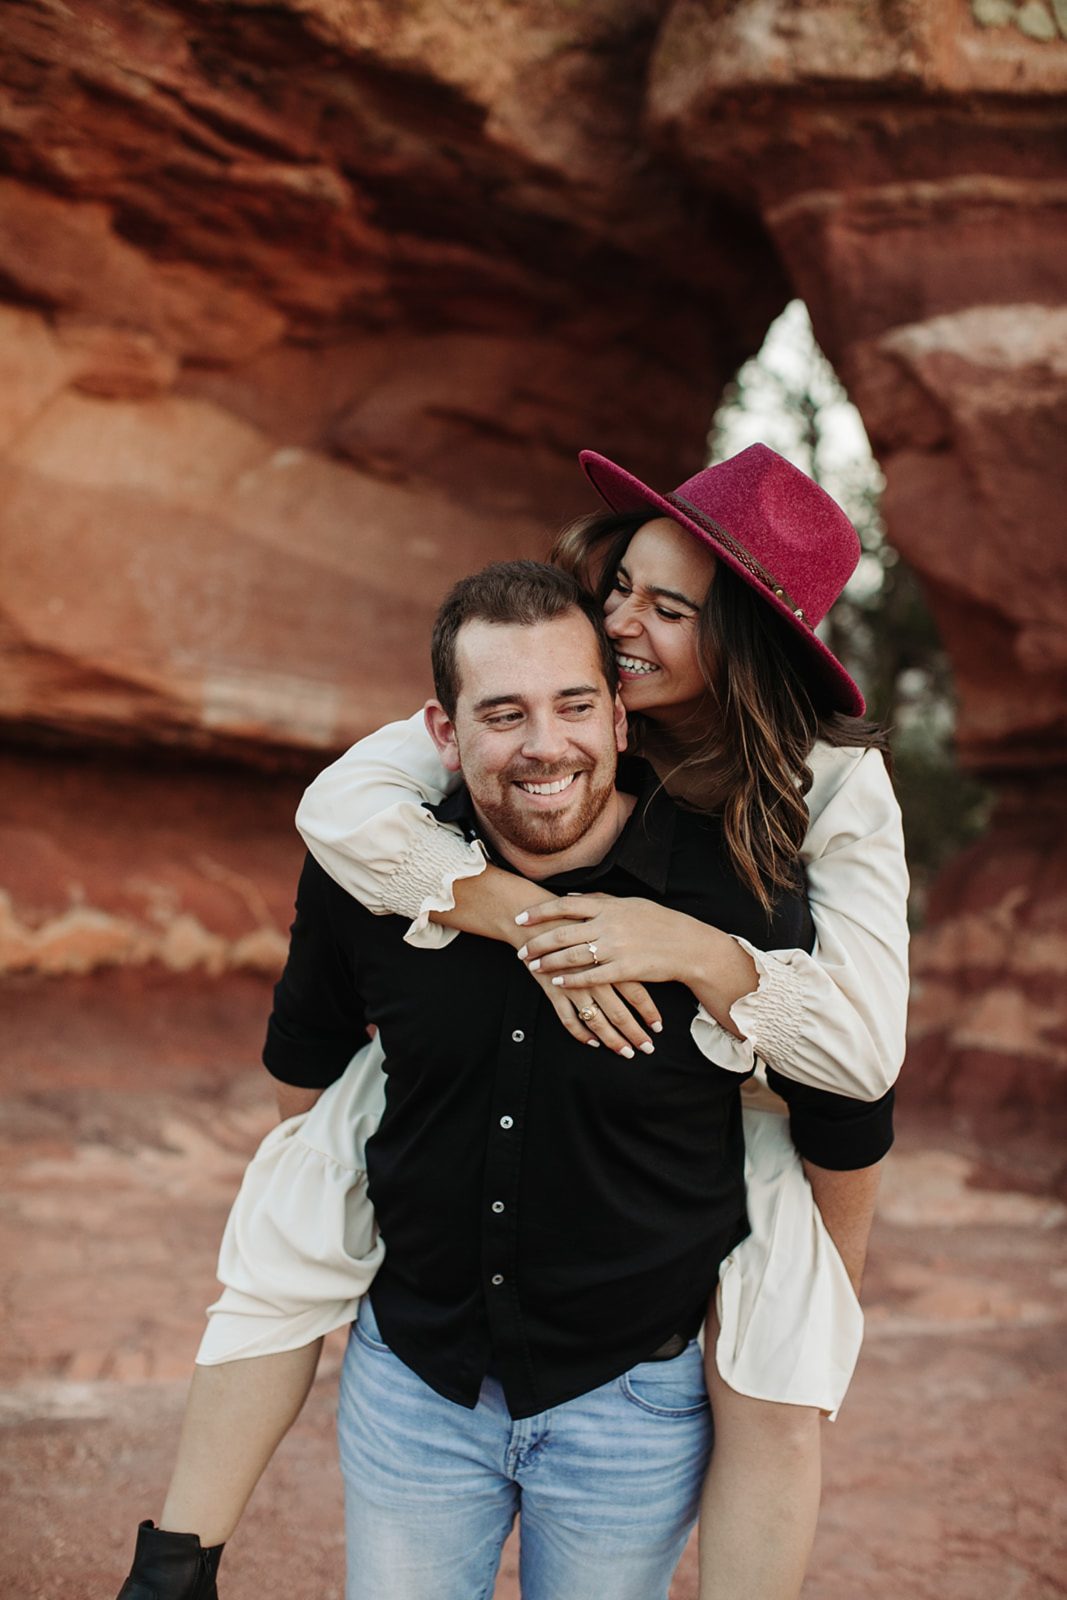 Garden of the Gods Engagement Photos, engagement session at garden of the gods, Colorado Springs engagement photos